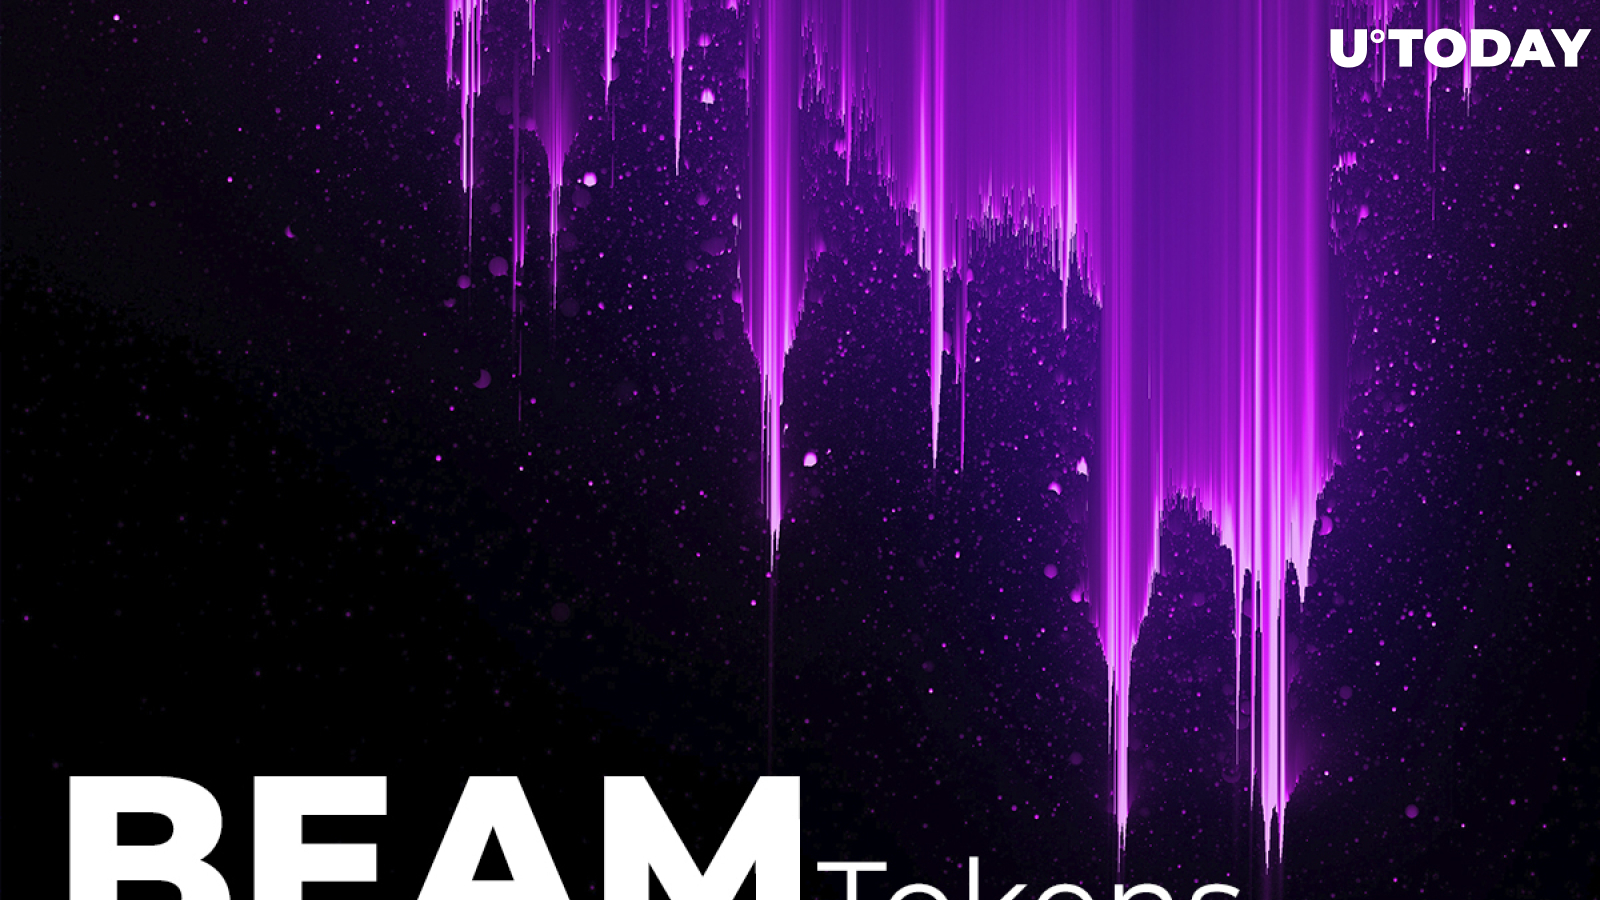 BEAM Tokens Will Be Available for Staking from Oct. 21: Details